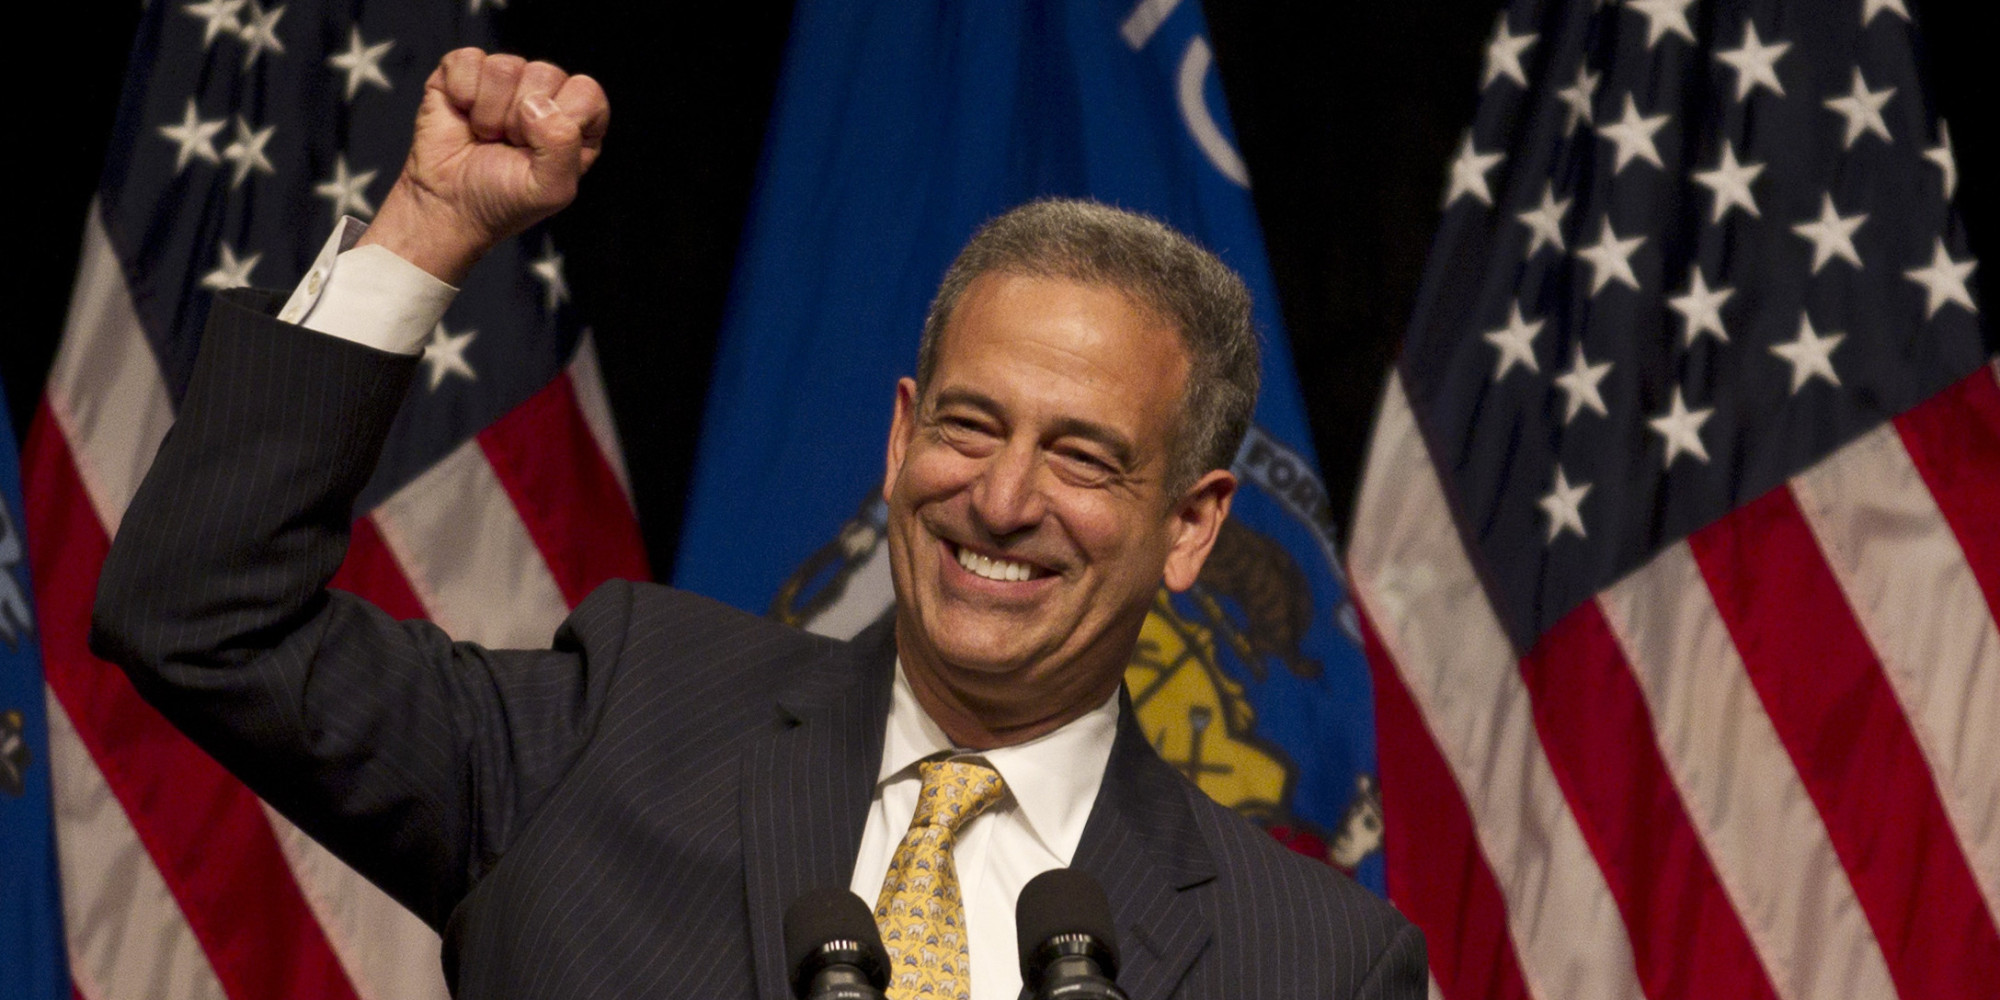 Russ Feingold smiling with a fist in the air while speaking at a campaign event. American flags in the background